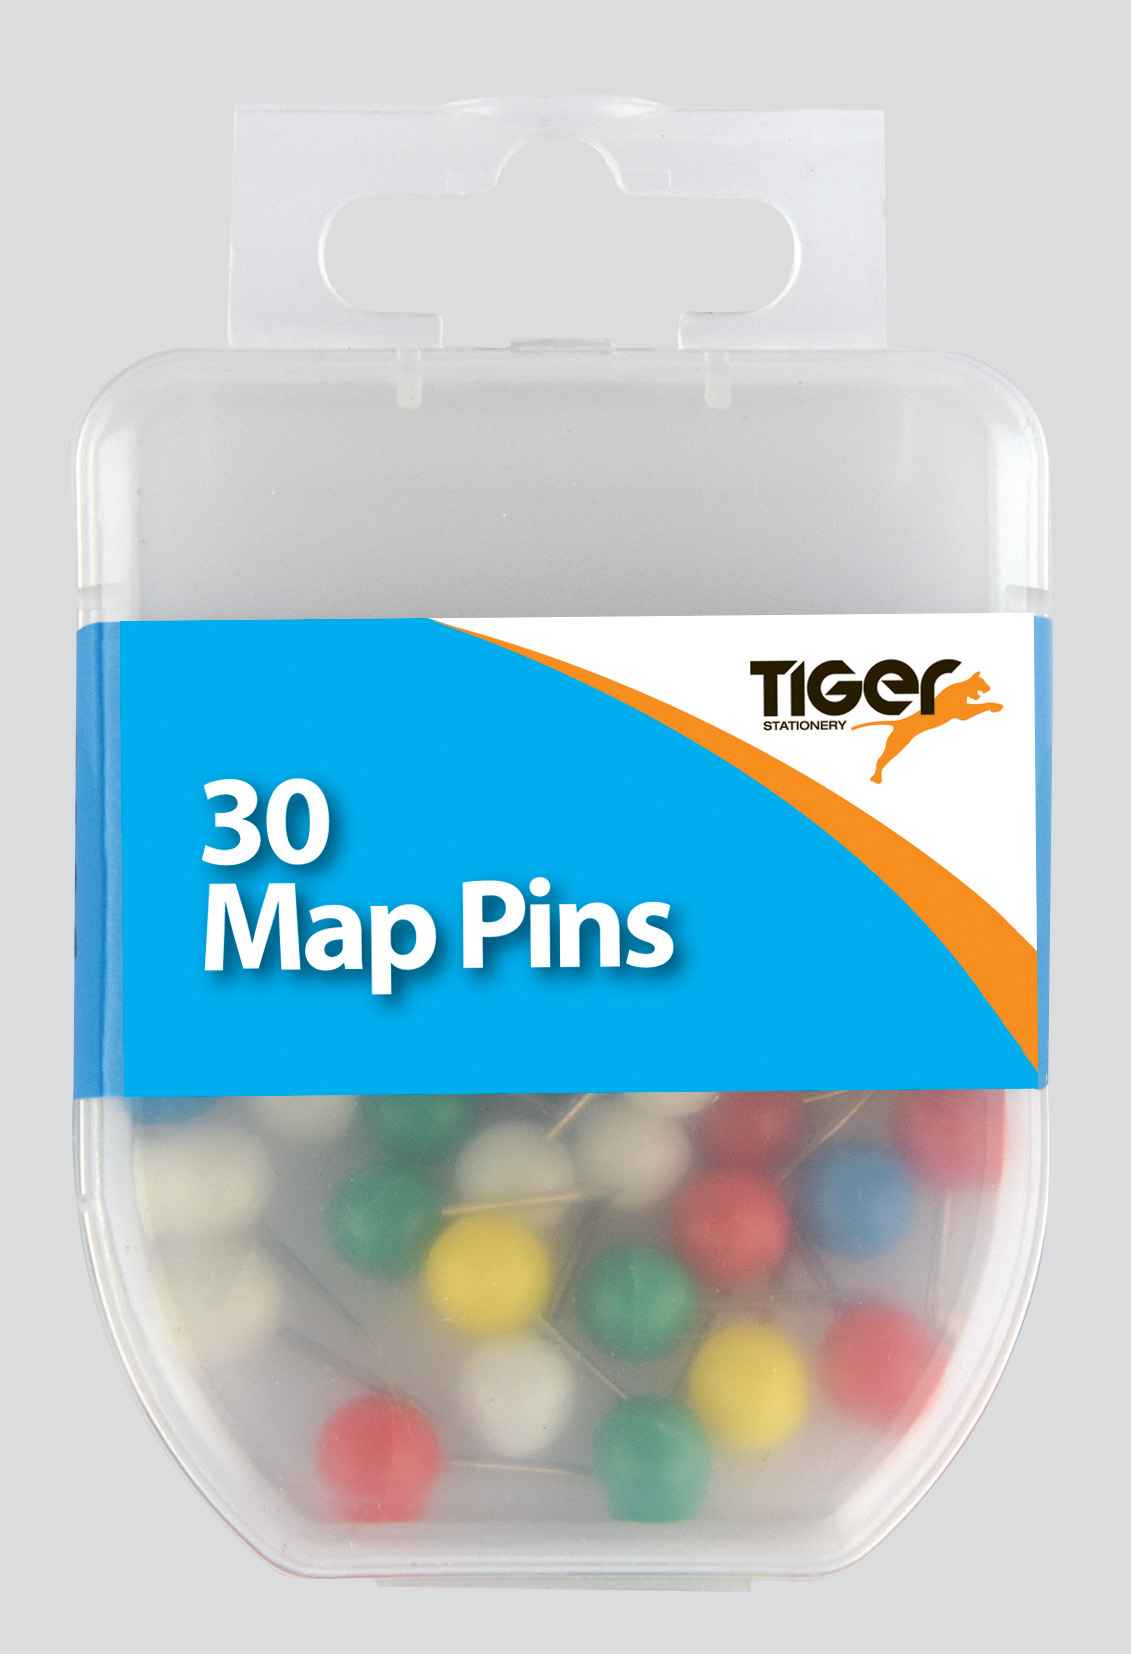 Tiger 30 Map Pins coloured